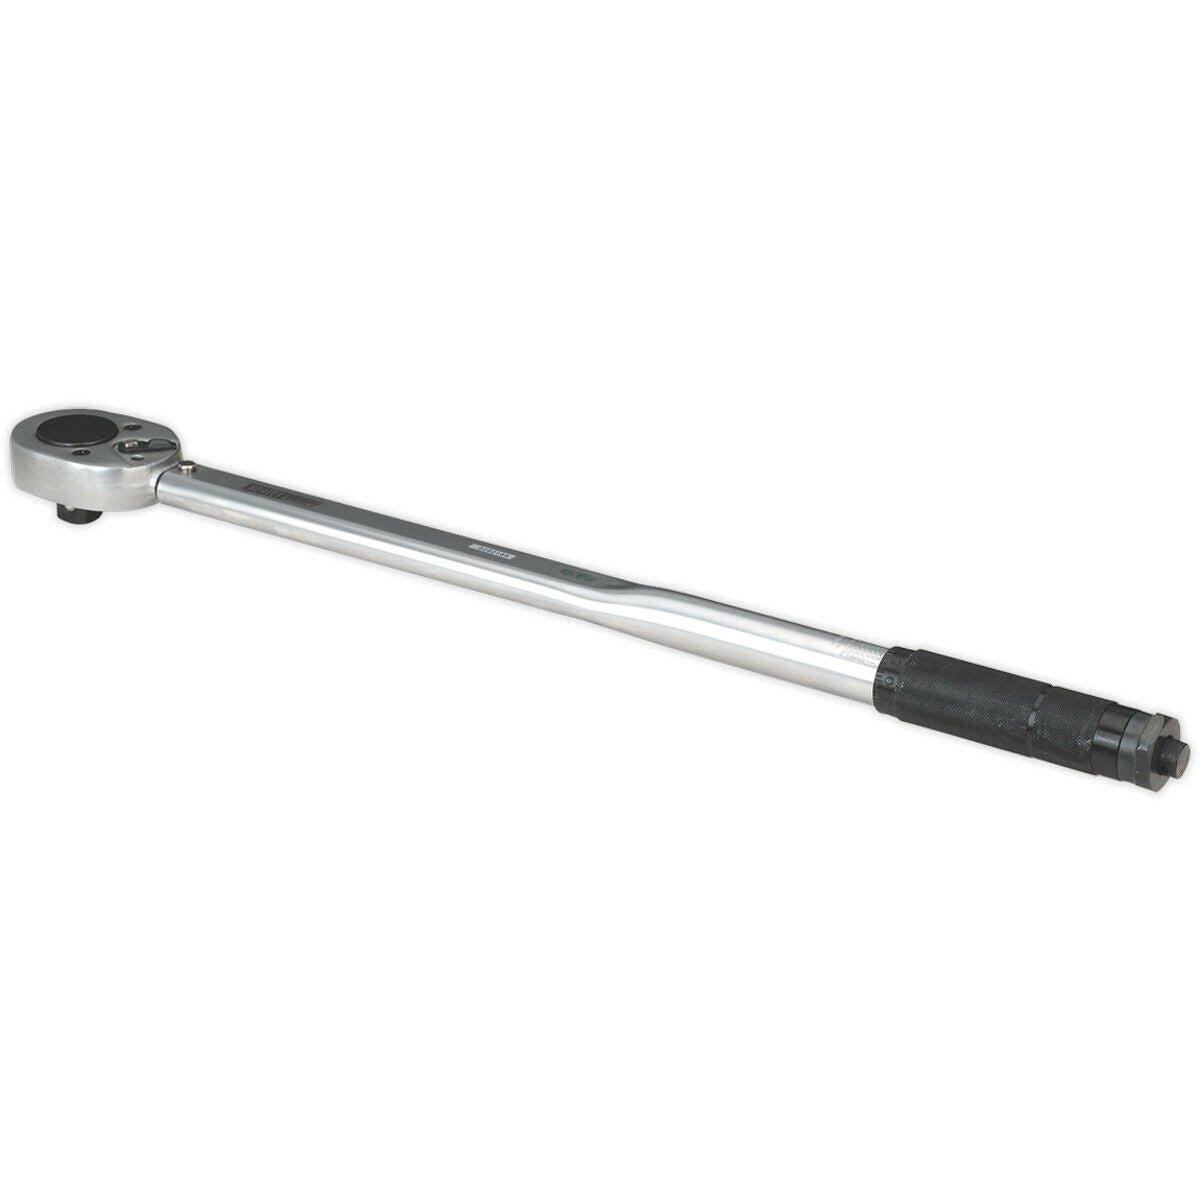 Calibrated Micrometer Torque Wrench - 3/4